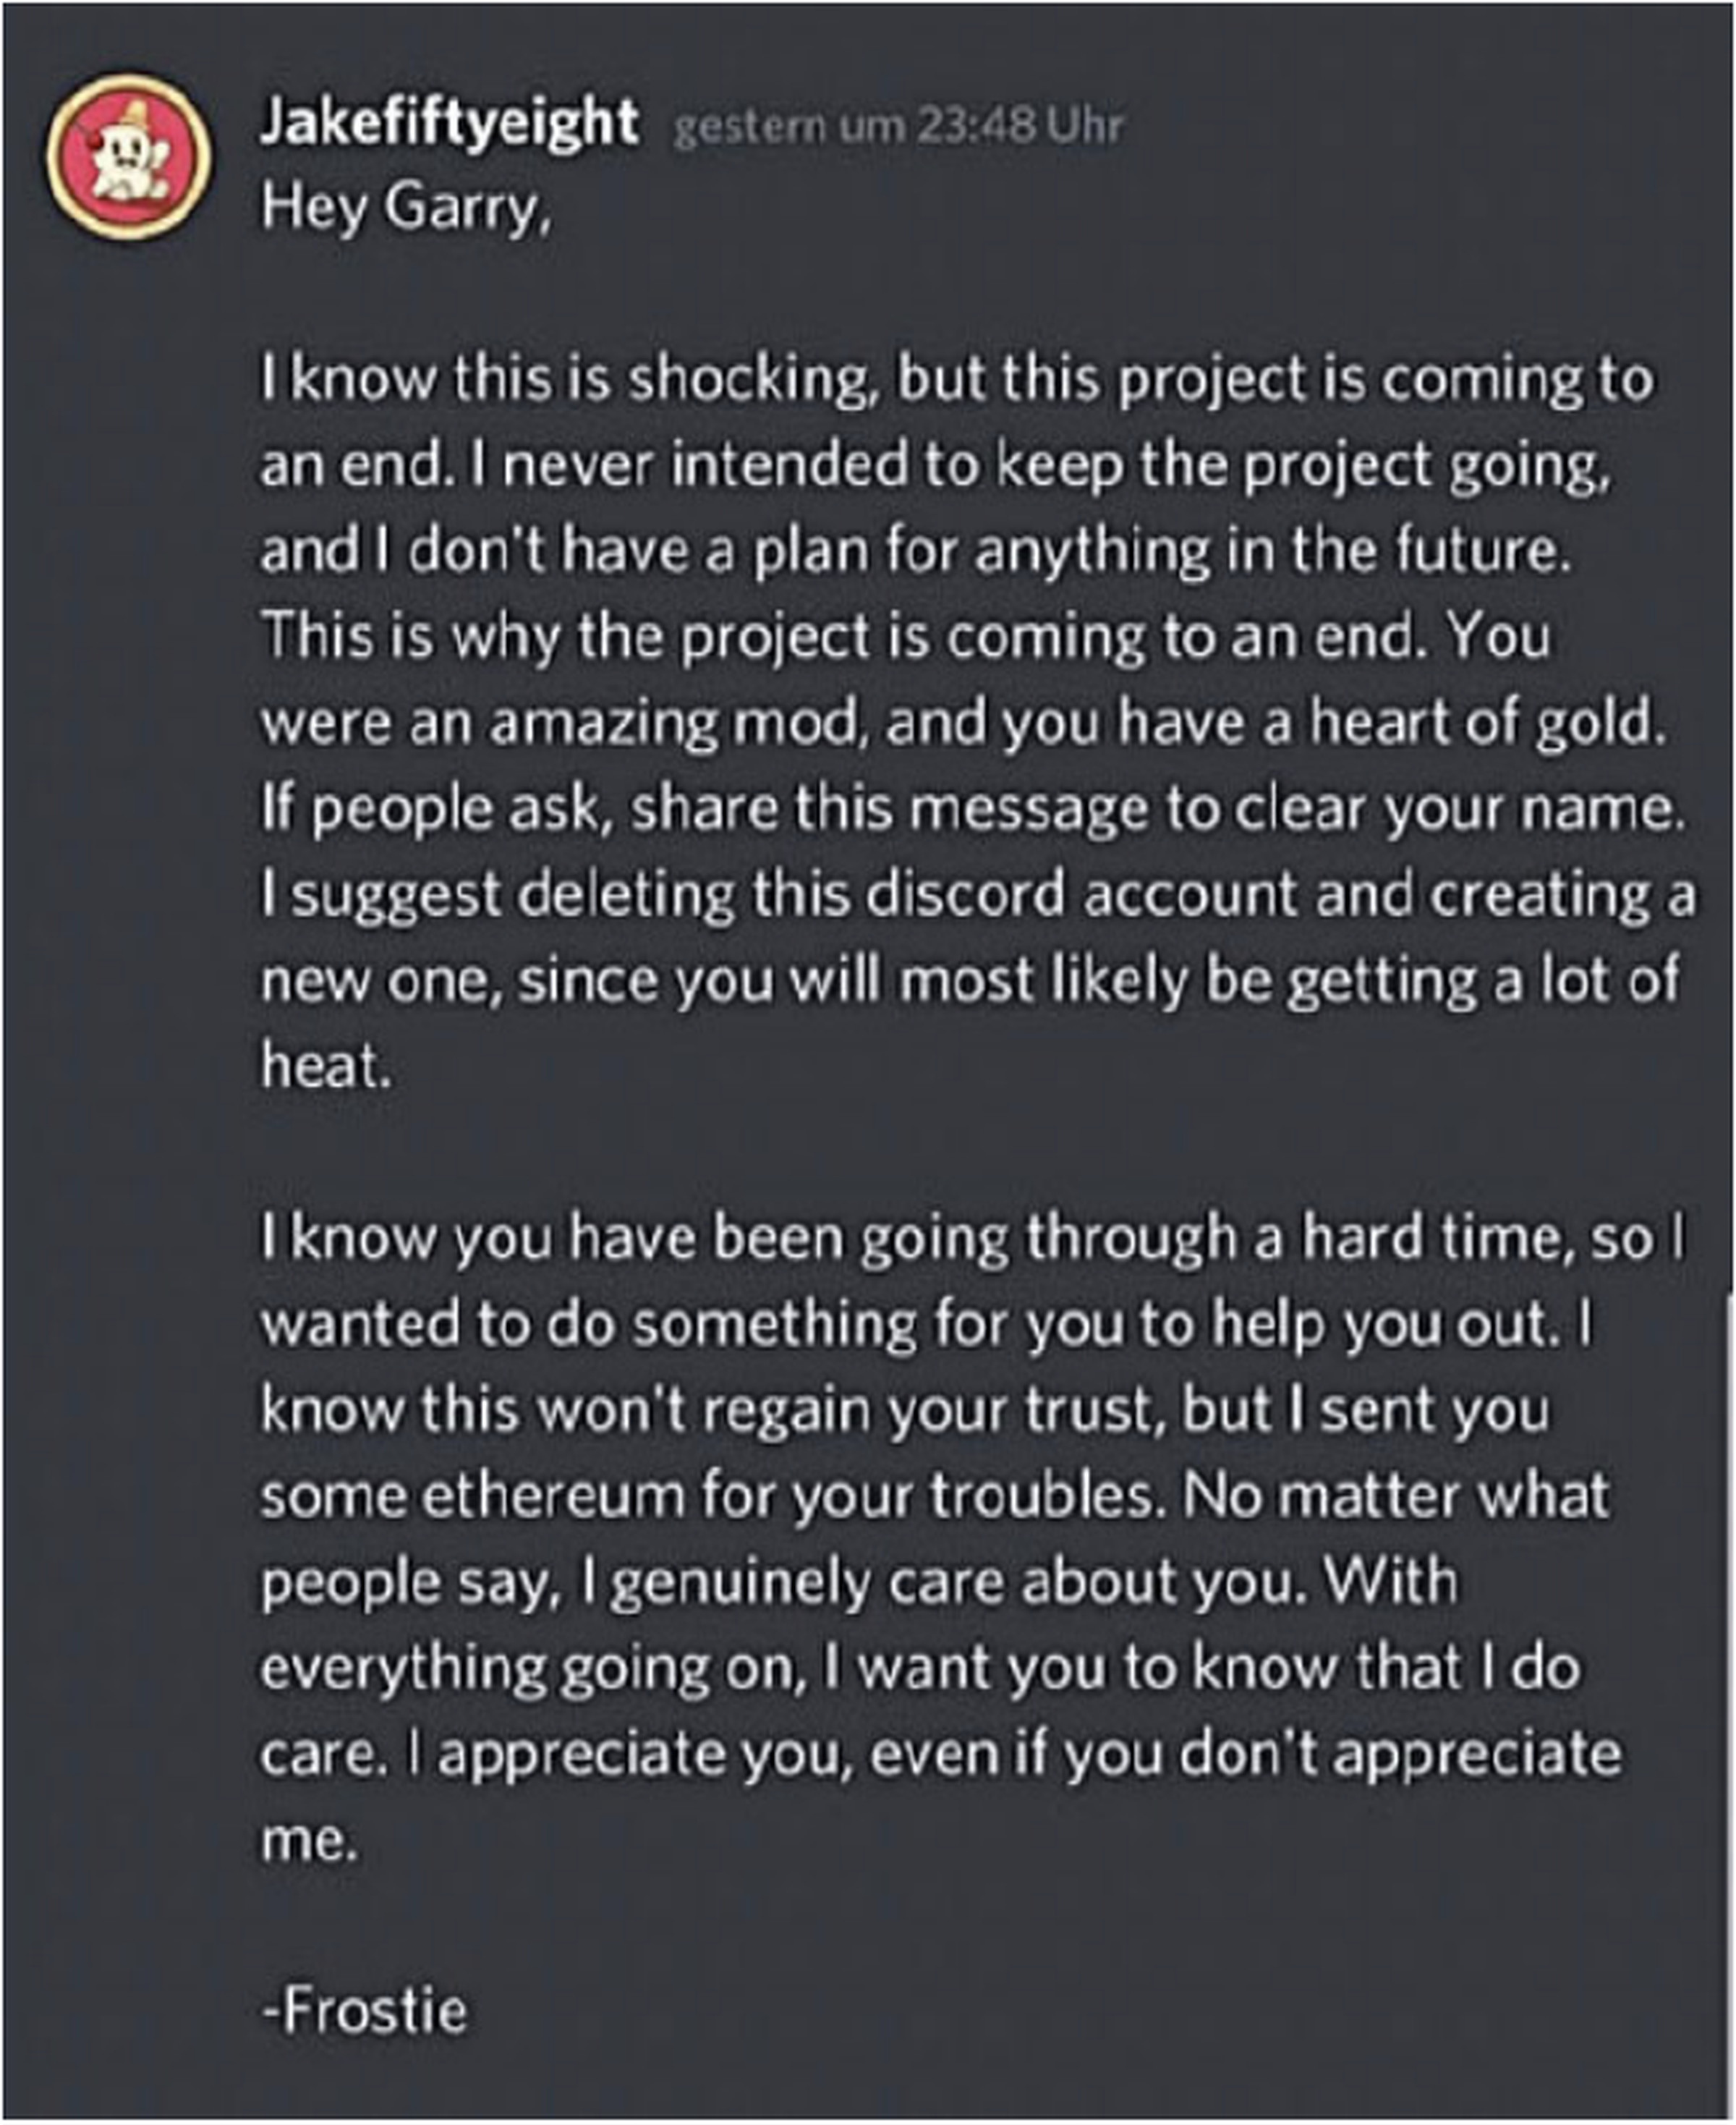 Hey Garry, I know this is shocking, but this project is coming to an end. I never intended to keep the project going, and I don’t have a plan for anything in the future. This is why the project is coming to an end. You were an amazing mod, and you have a heart of gold. ... No matter what people say, I genuinely care about you. With everything going on, I want you to know that I do care. I appreciate you, even if you don’t appreciate me. - Frostie.